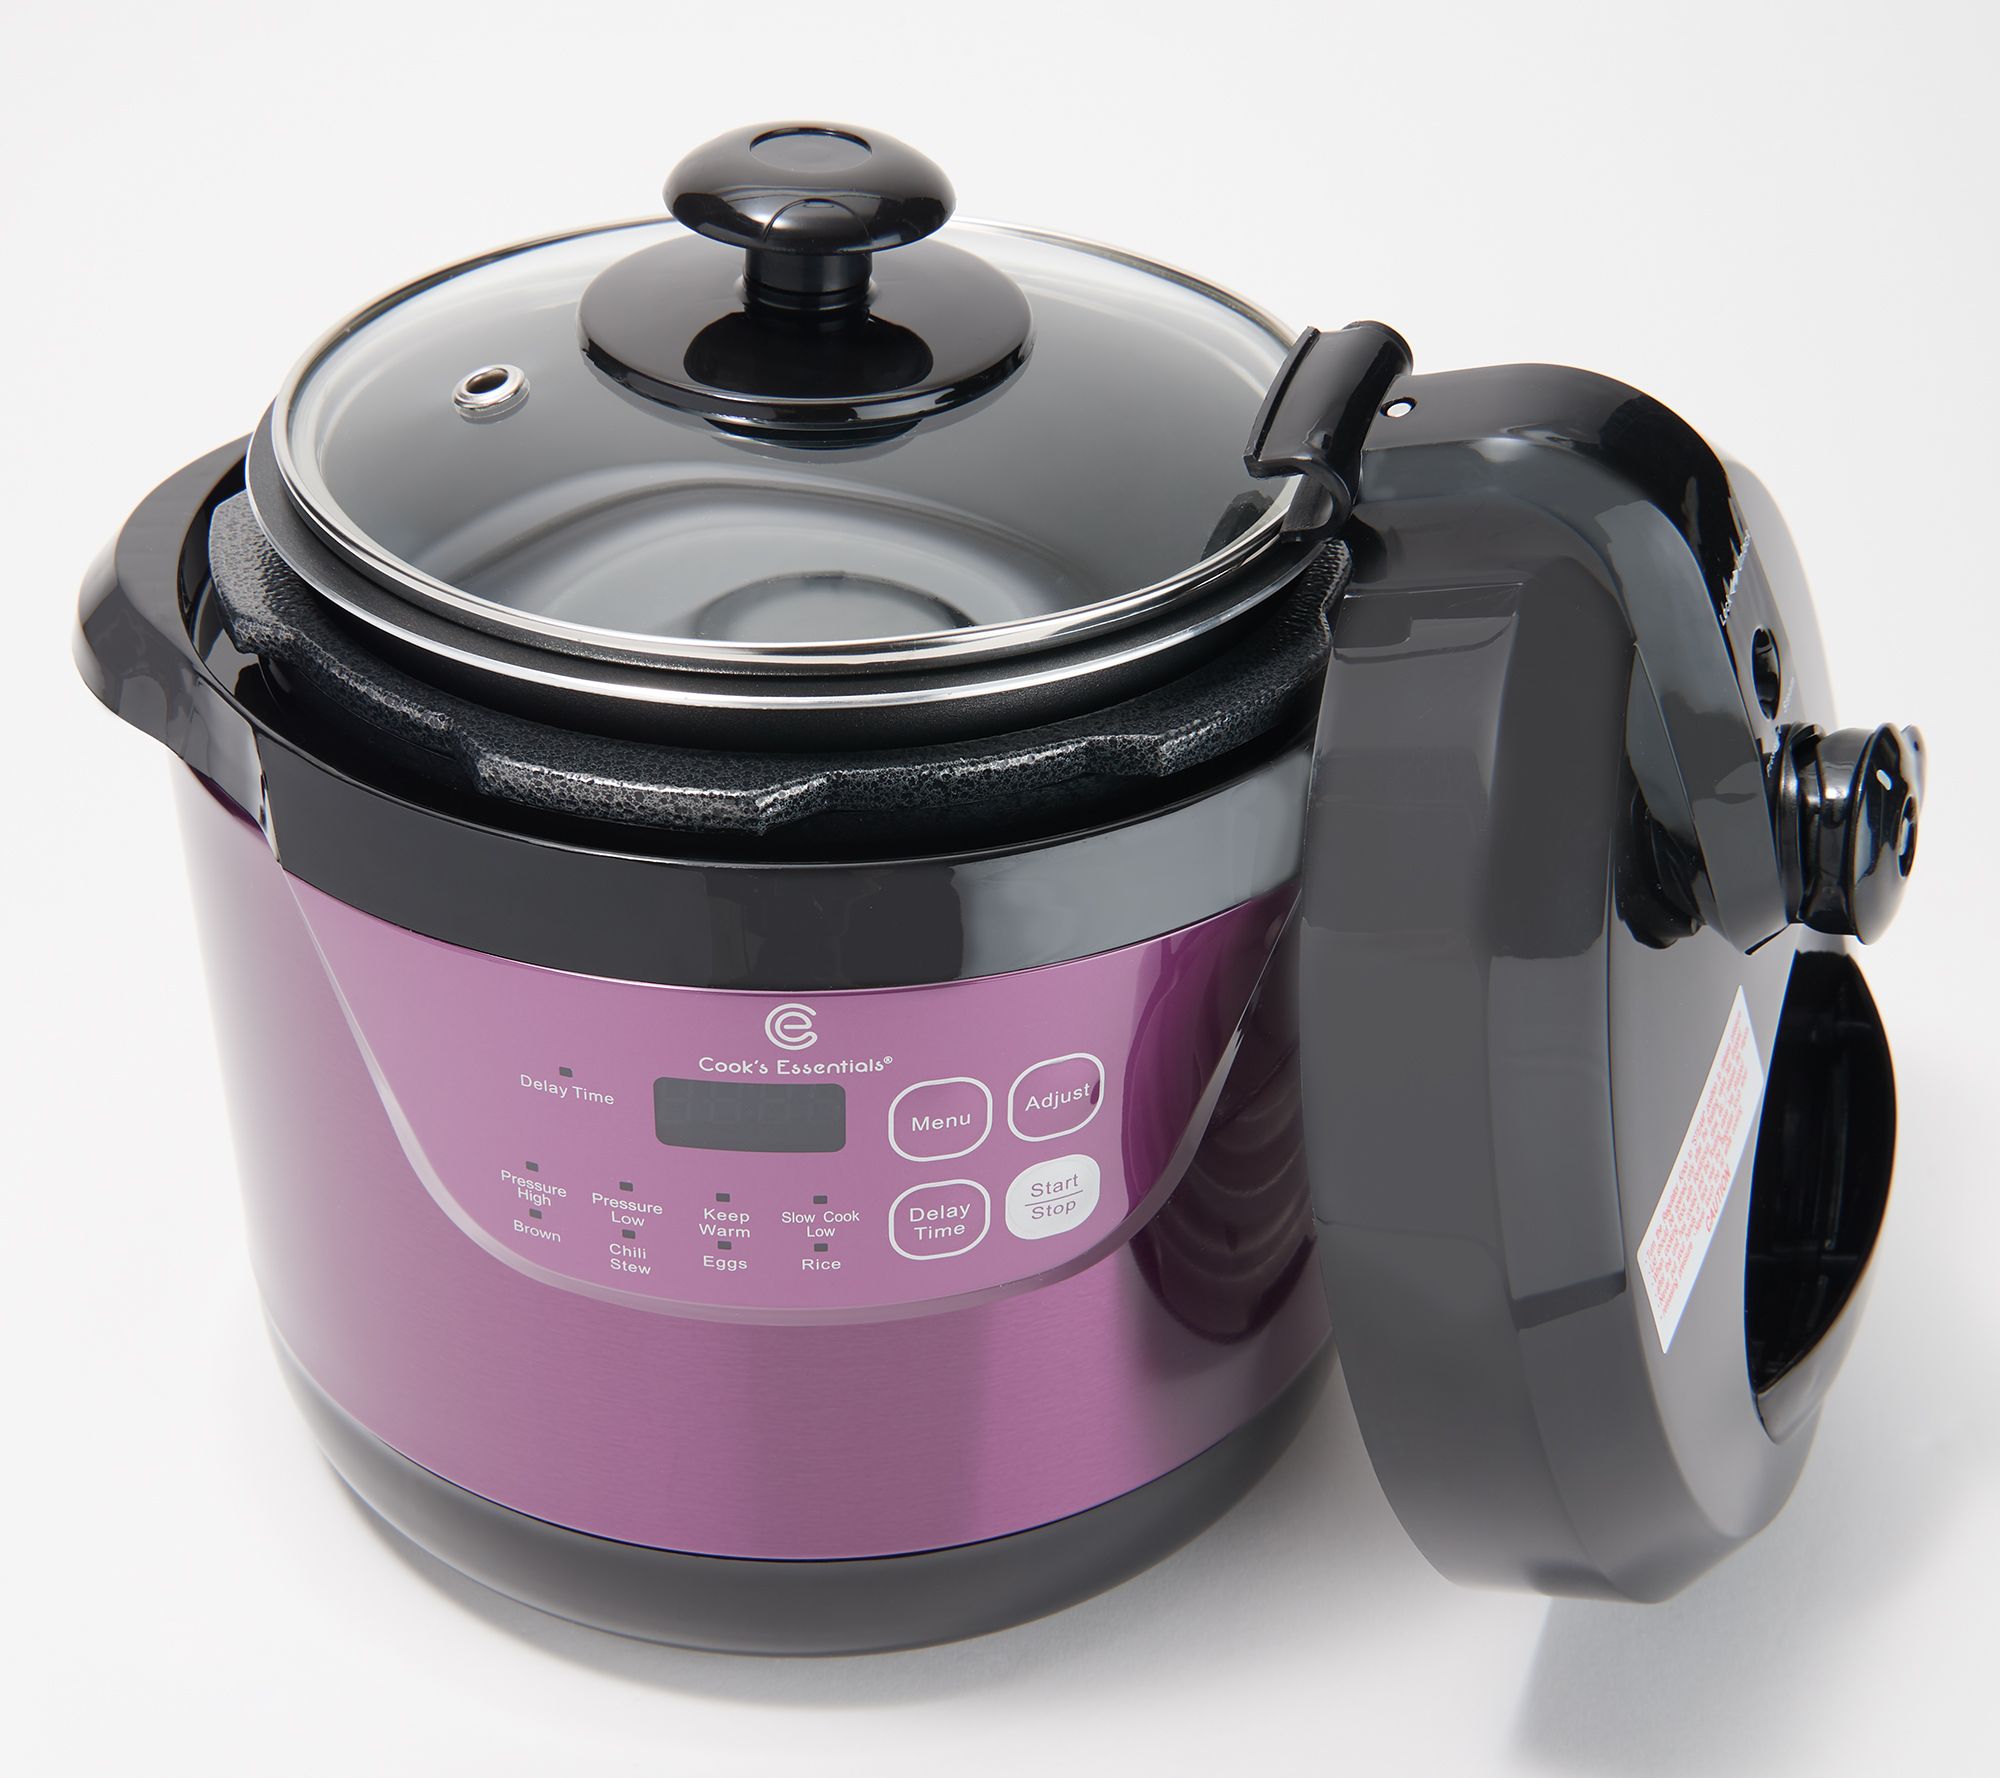 Cook's Essentials 3-qt Pressure Cooker With Glass Lid | lupon.gov.ph